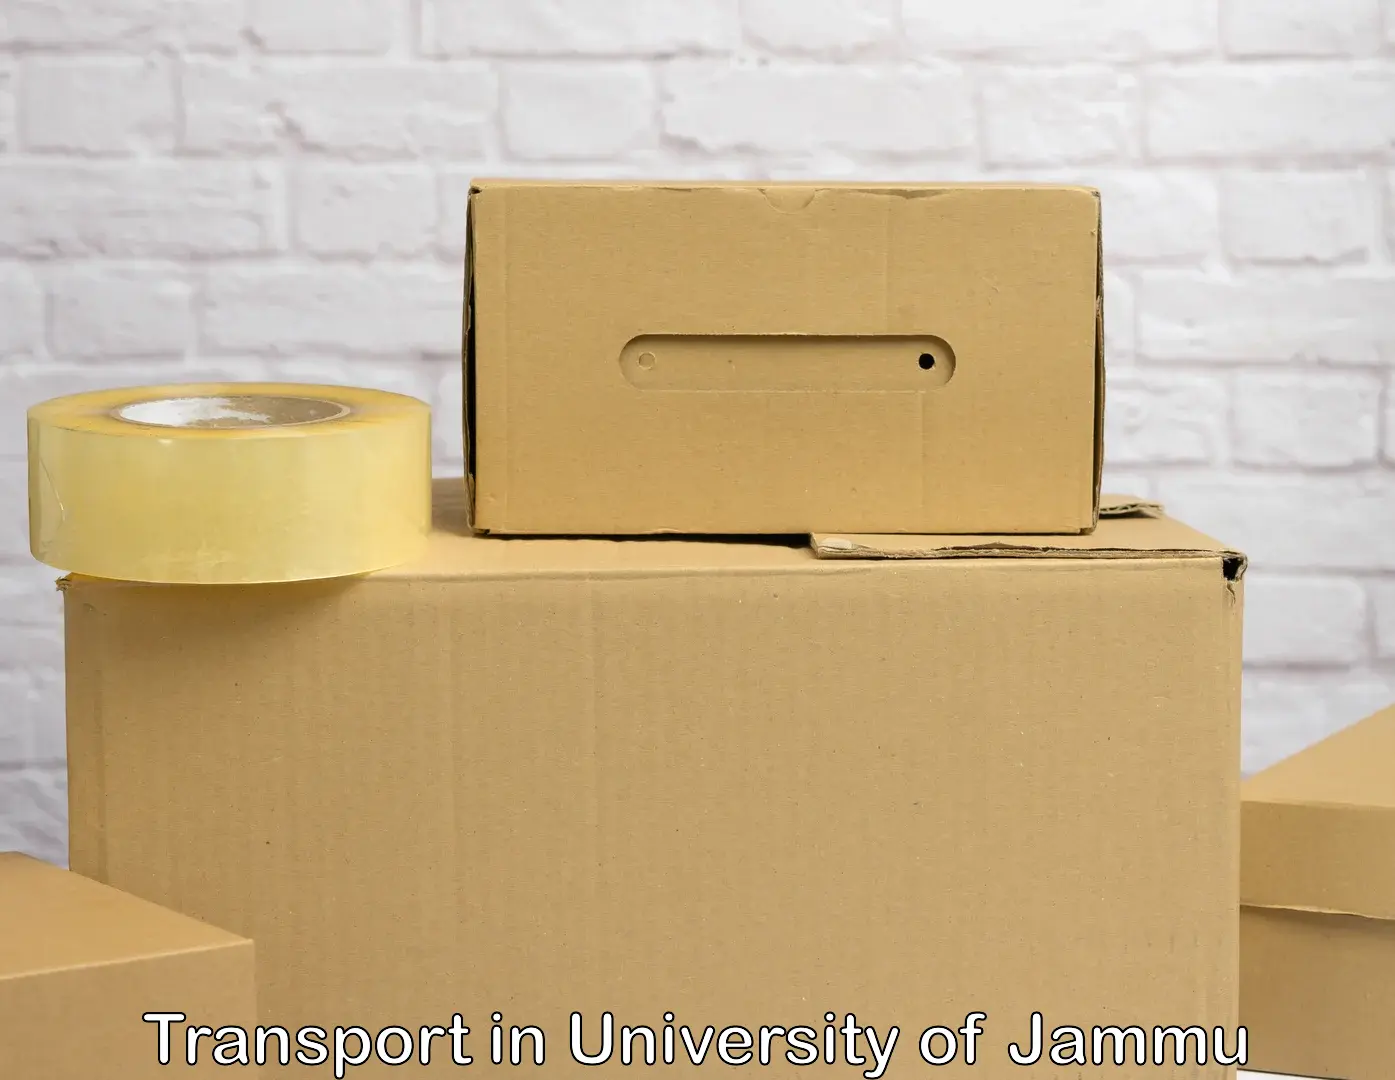 Container transport service in University of Jammu